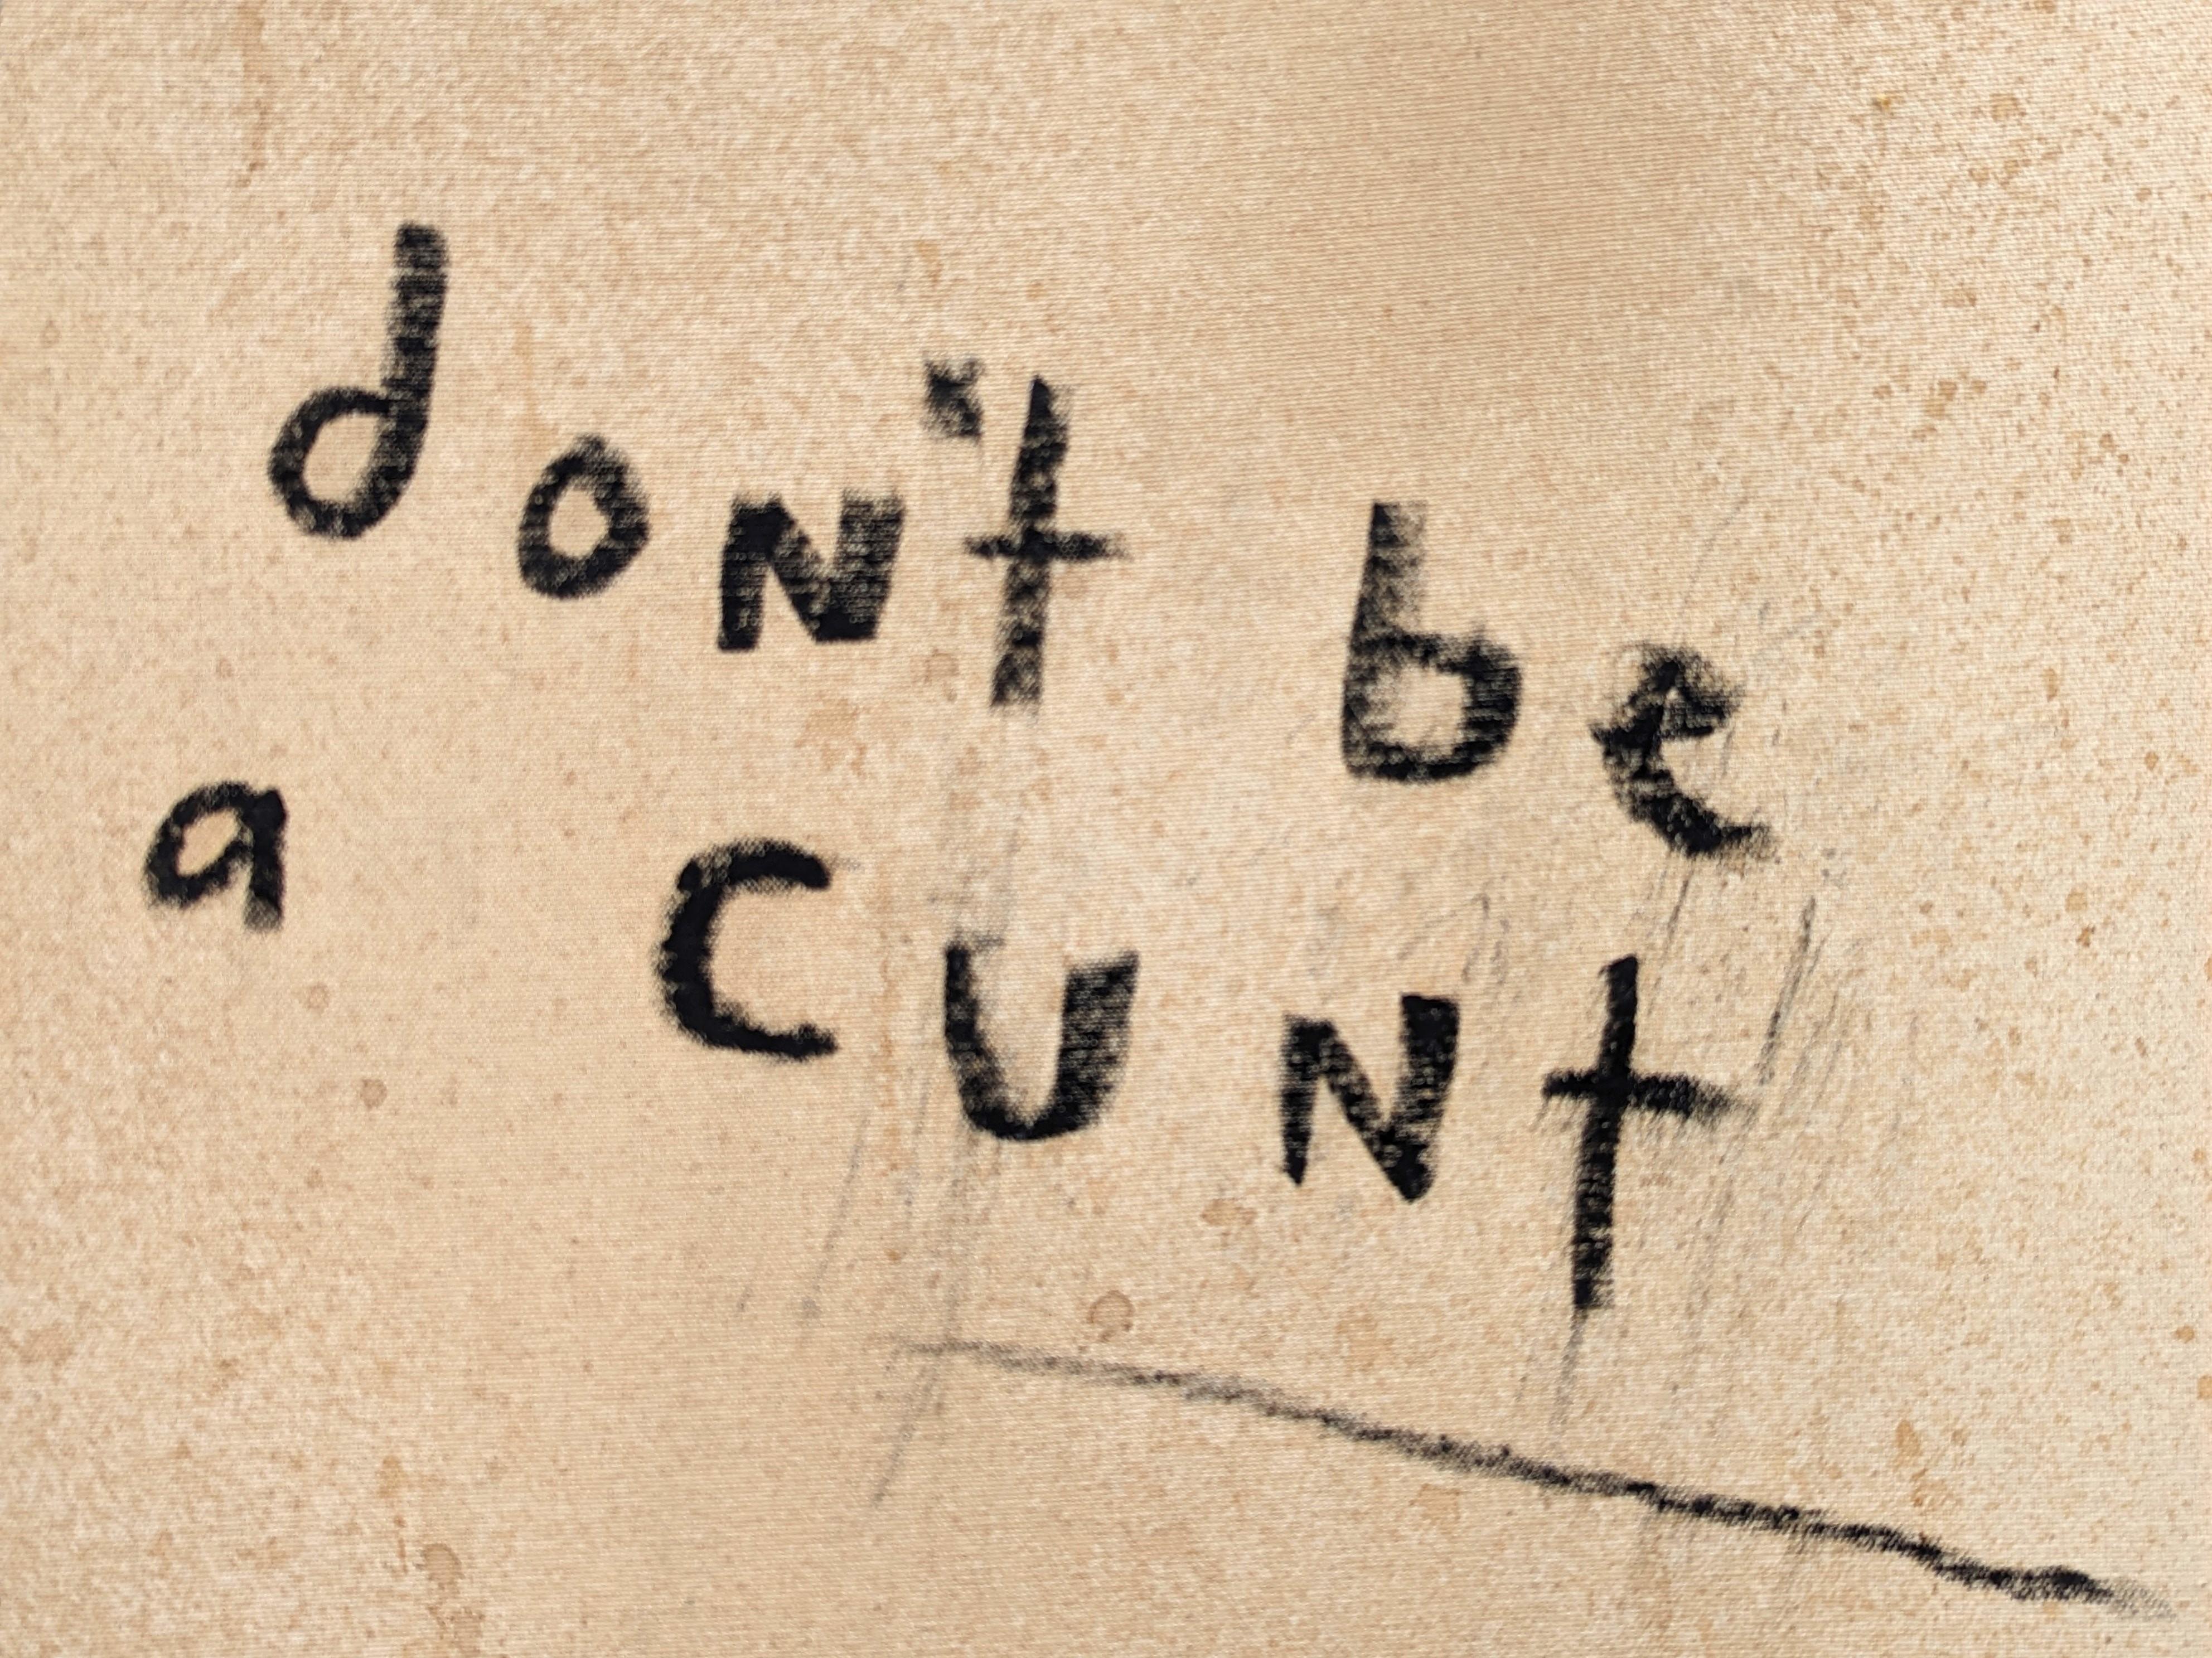 “Don't Be a Cunt” Abstract Contemporary Black & Tan Text Painting For Sale 2